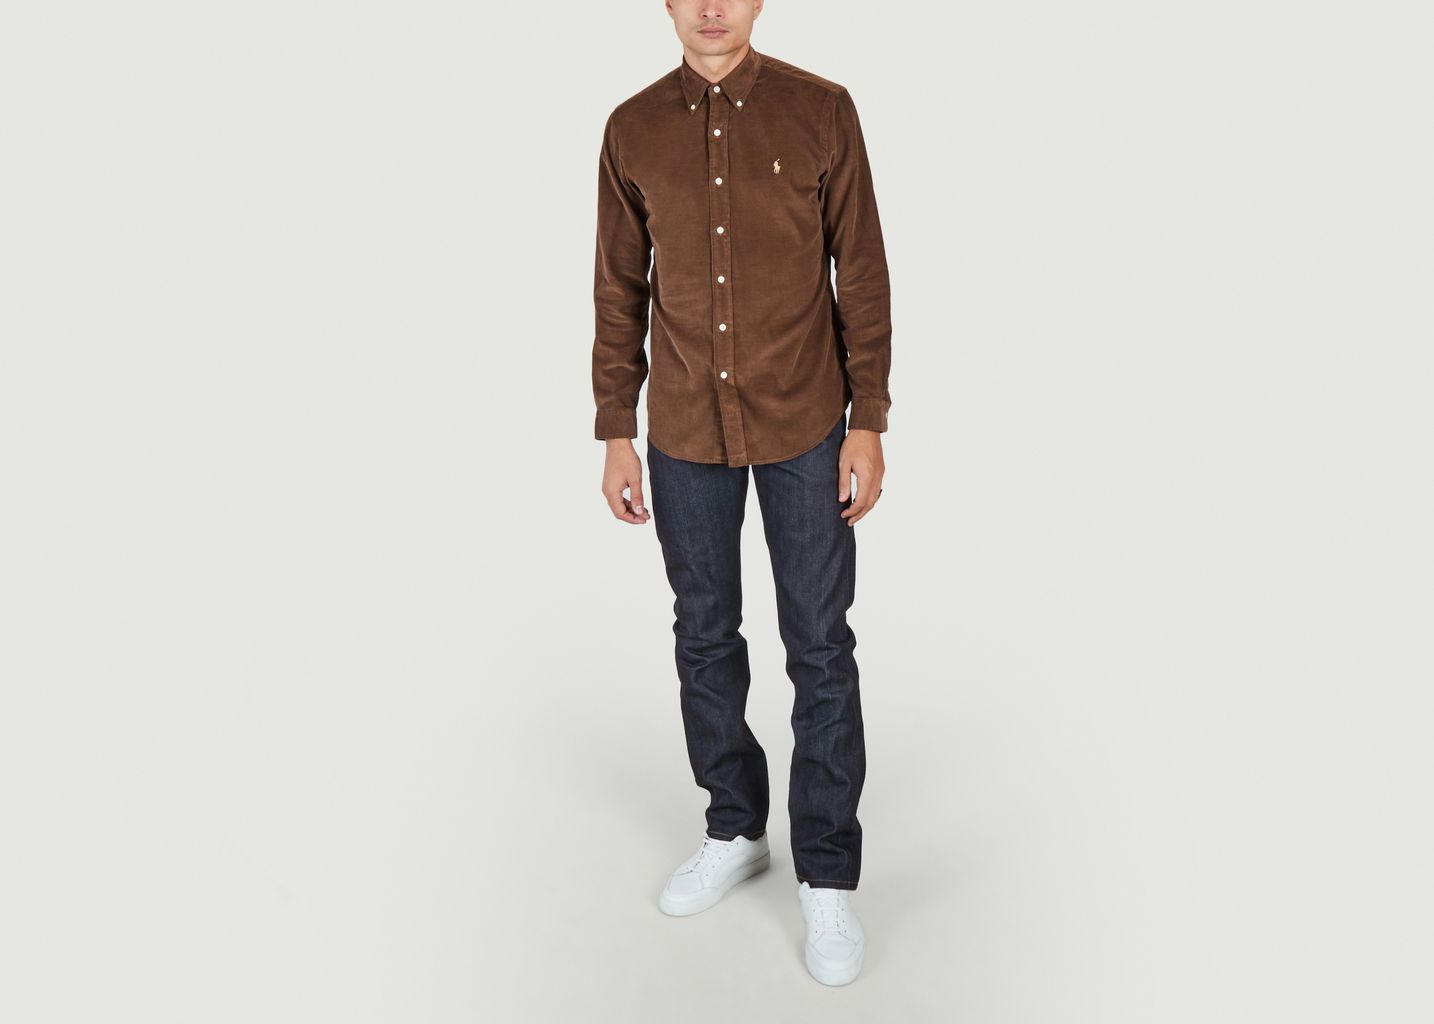 Fitted corduroy shirt with logo - Polo Ralph Lauren